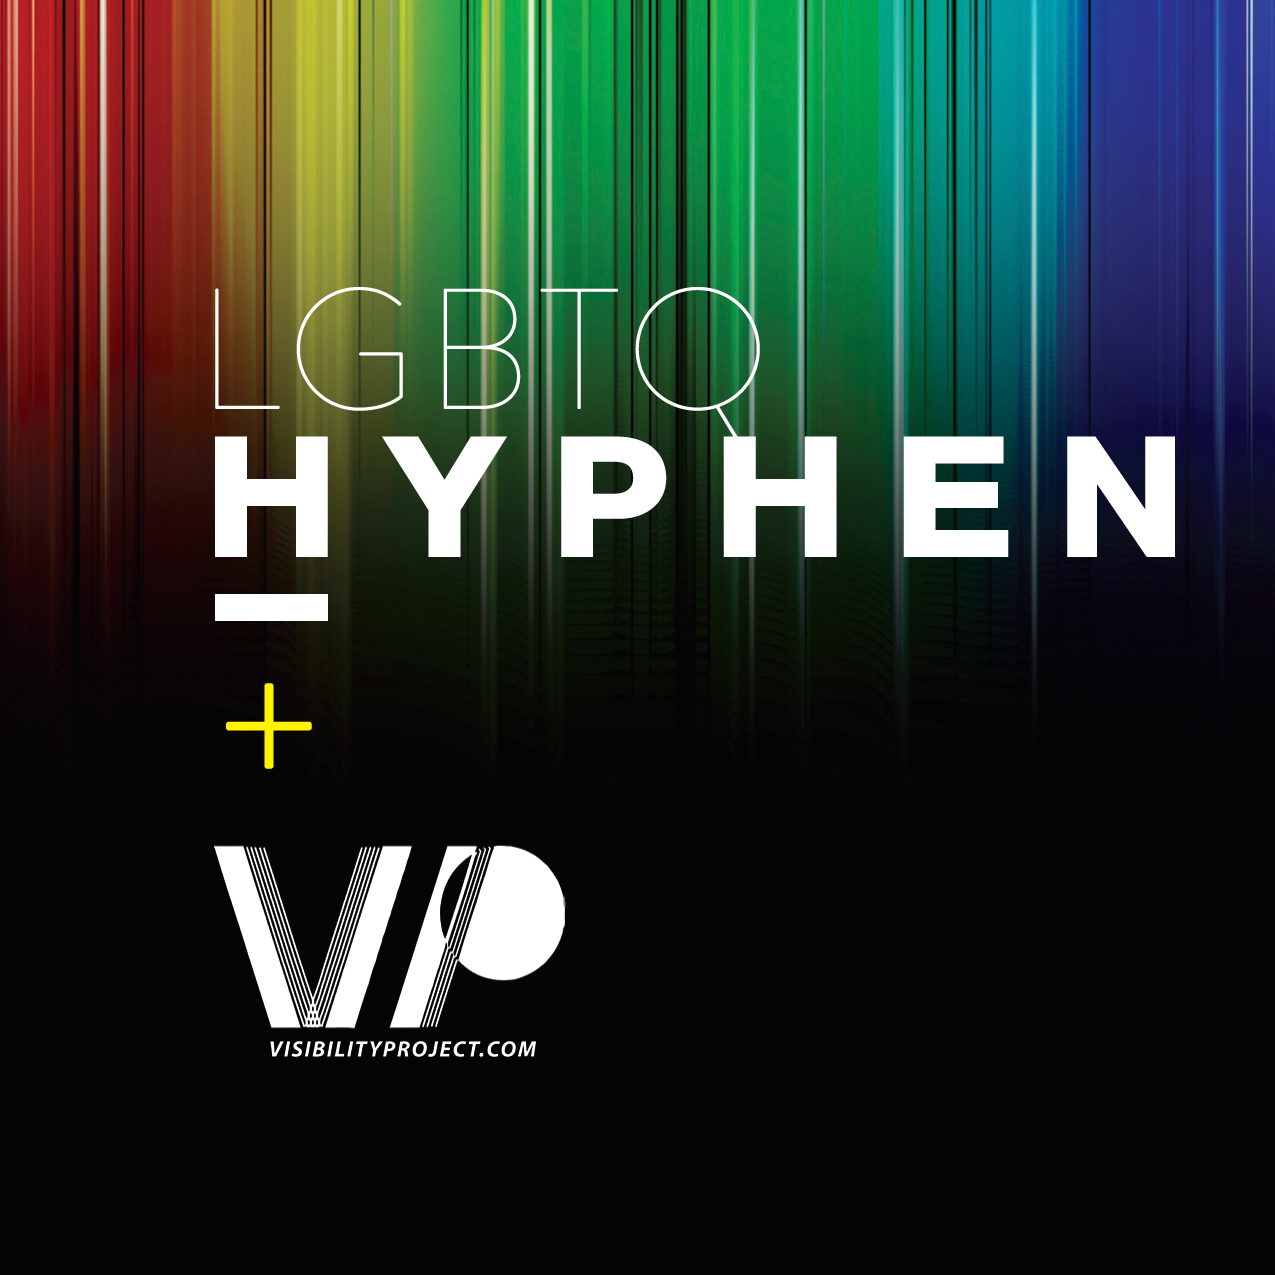 LGBTQHyphen_VisibilityProject_Square